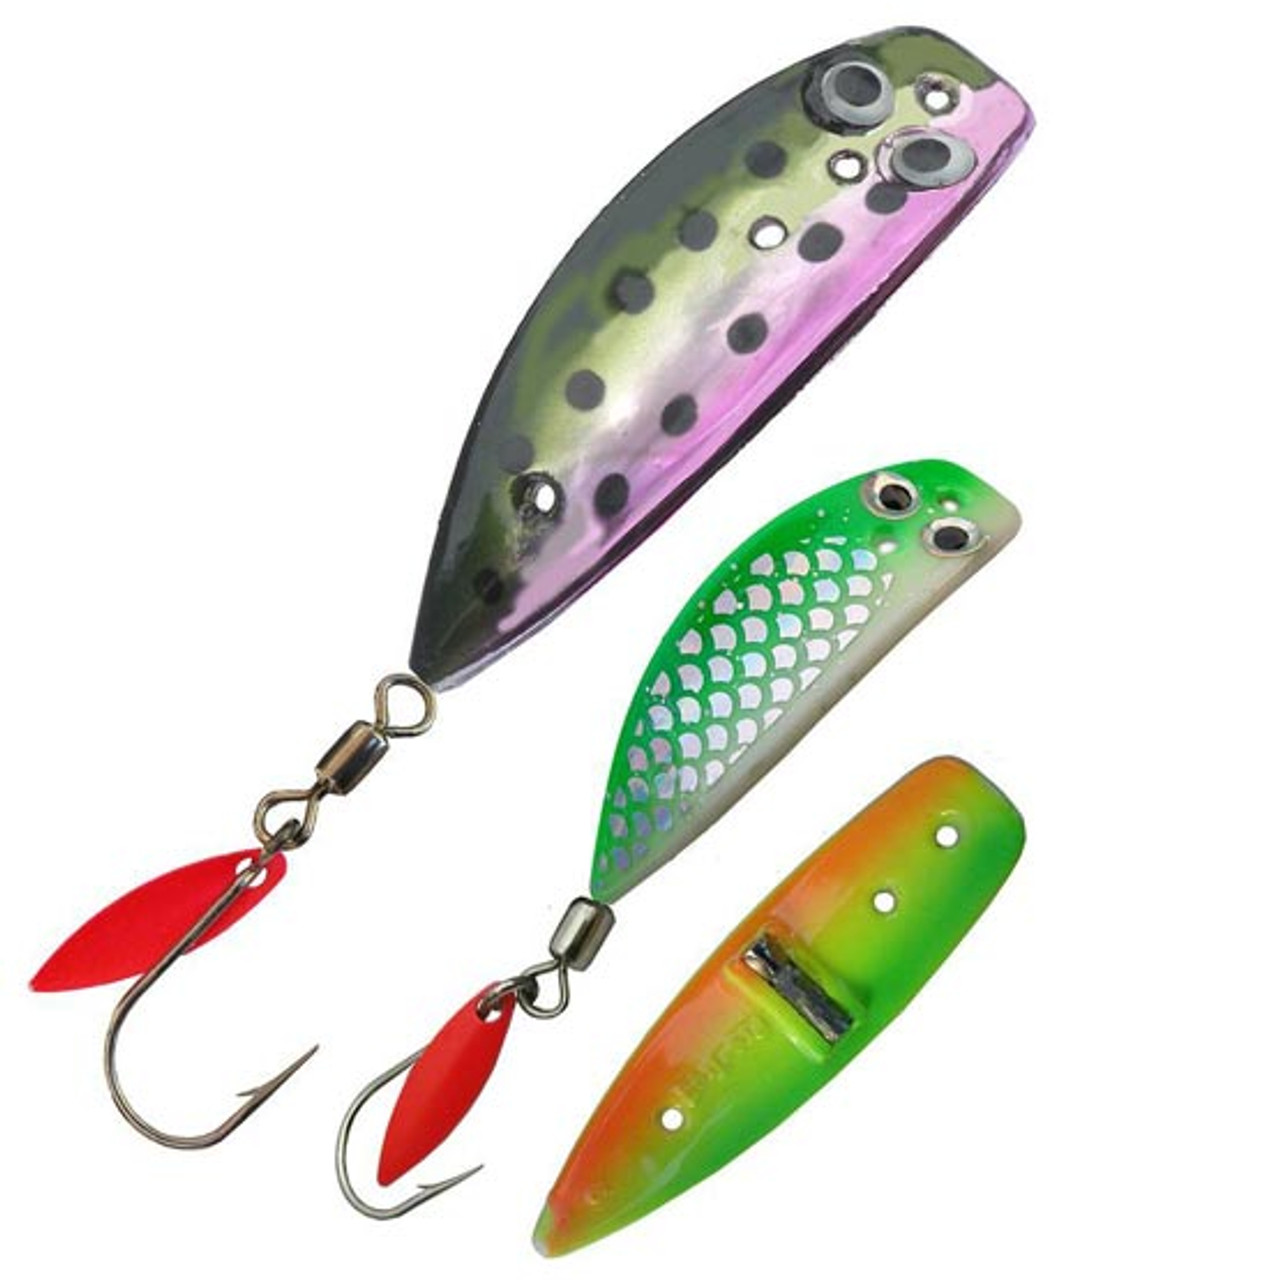 Pro-Troll Fishing Products Kokanee Killer Lure with EChip, Size 1.0, Kok Red